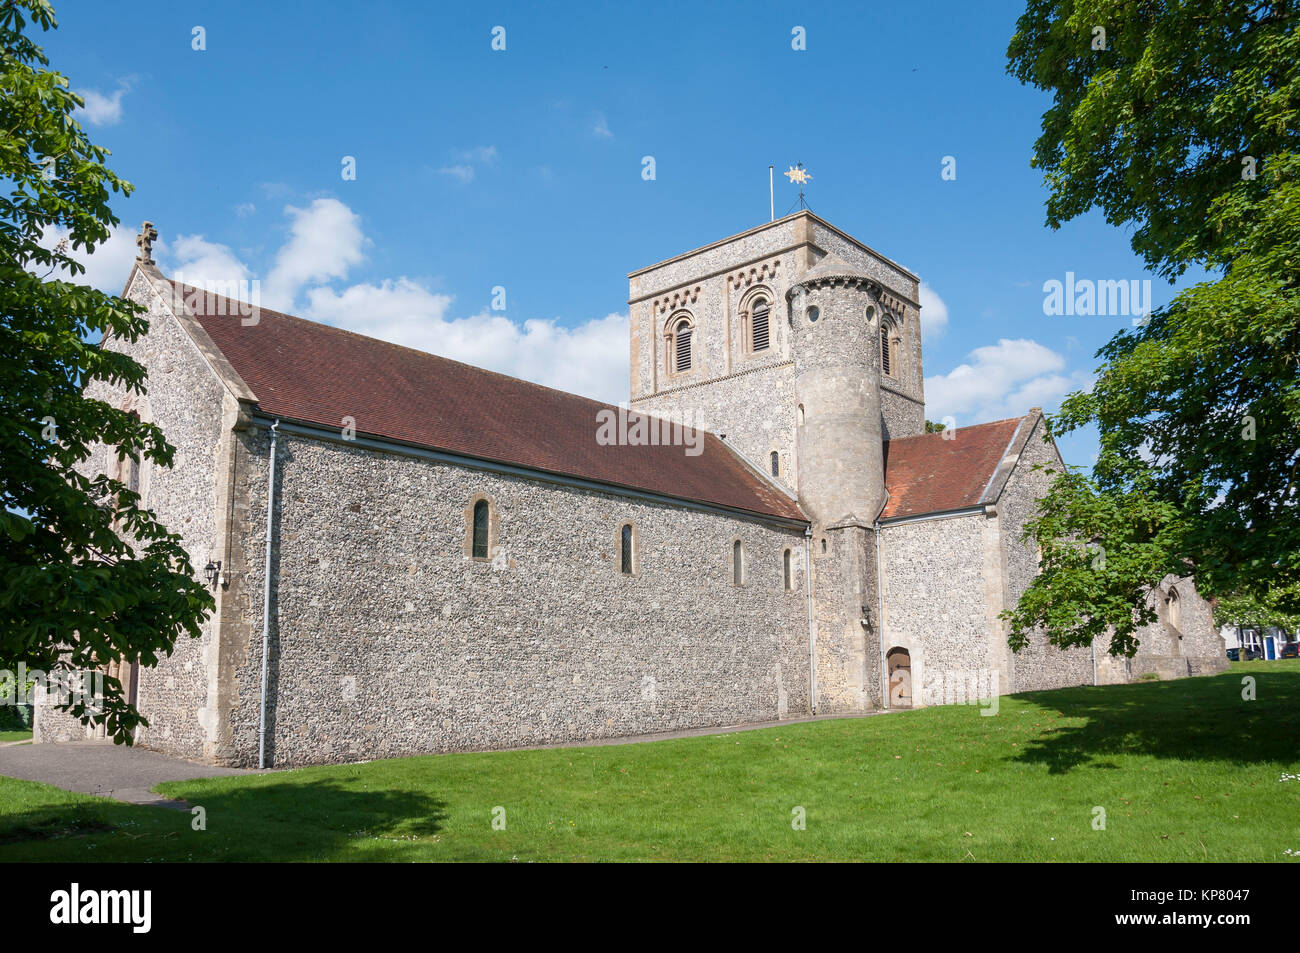 L'église St Mary, Swan Street, Kingsclere, Hampshire, Angleterre, Royaume-Uni Banque D'Images